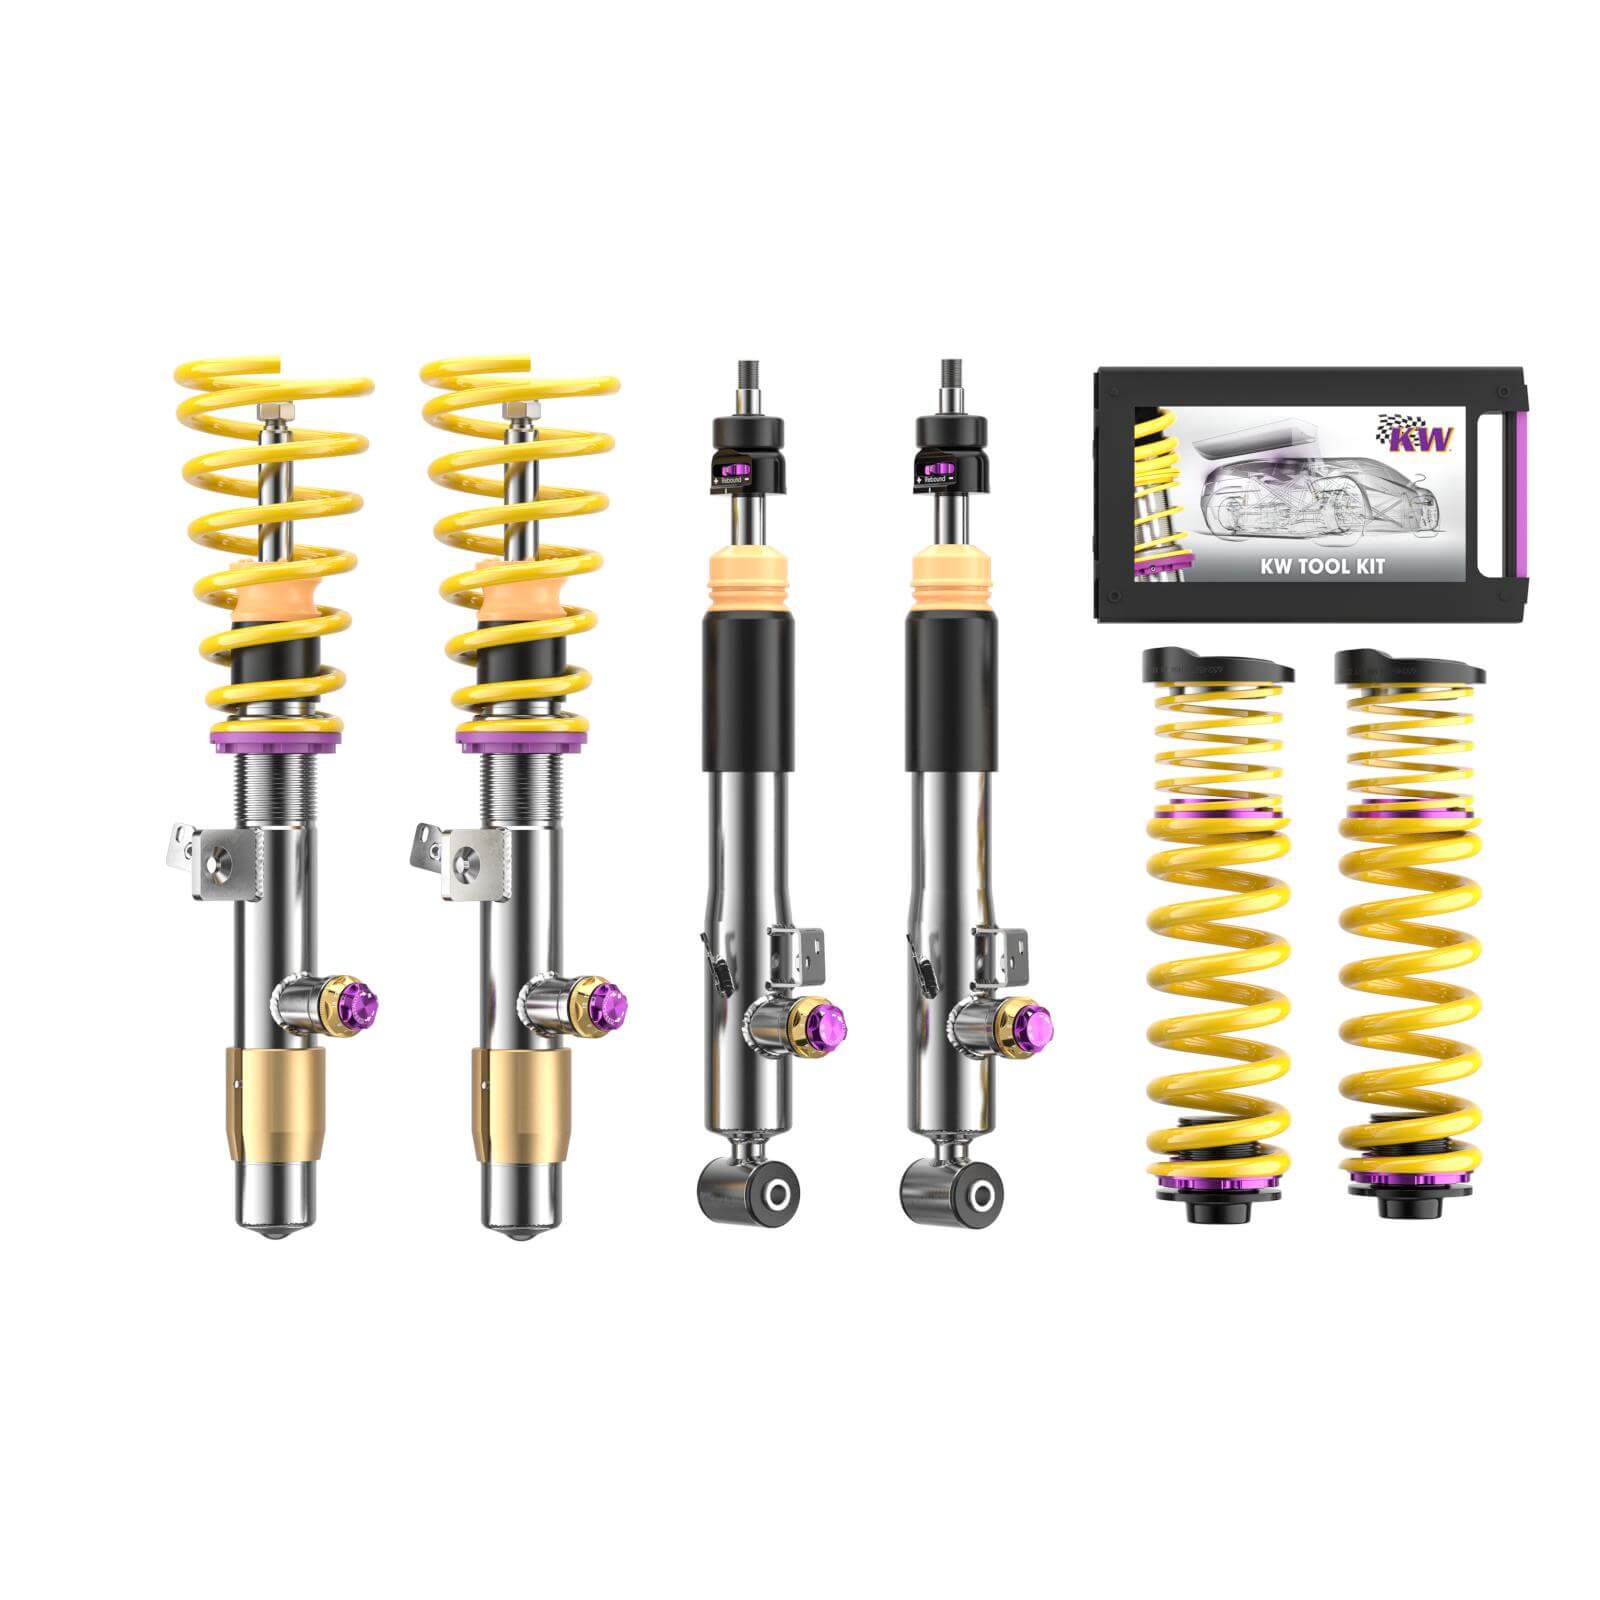 KW 3A766016 Coilover kit V4 for GENESIS Genesis G80 (RG3) 2020+ Photo-0 